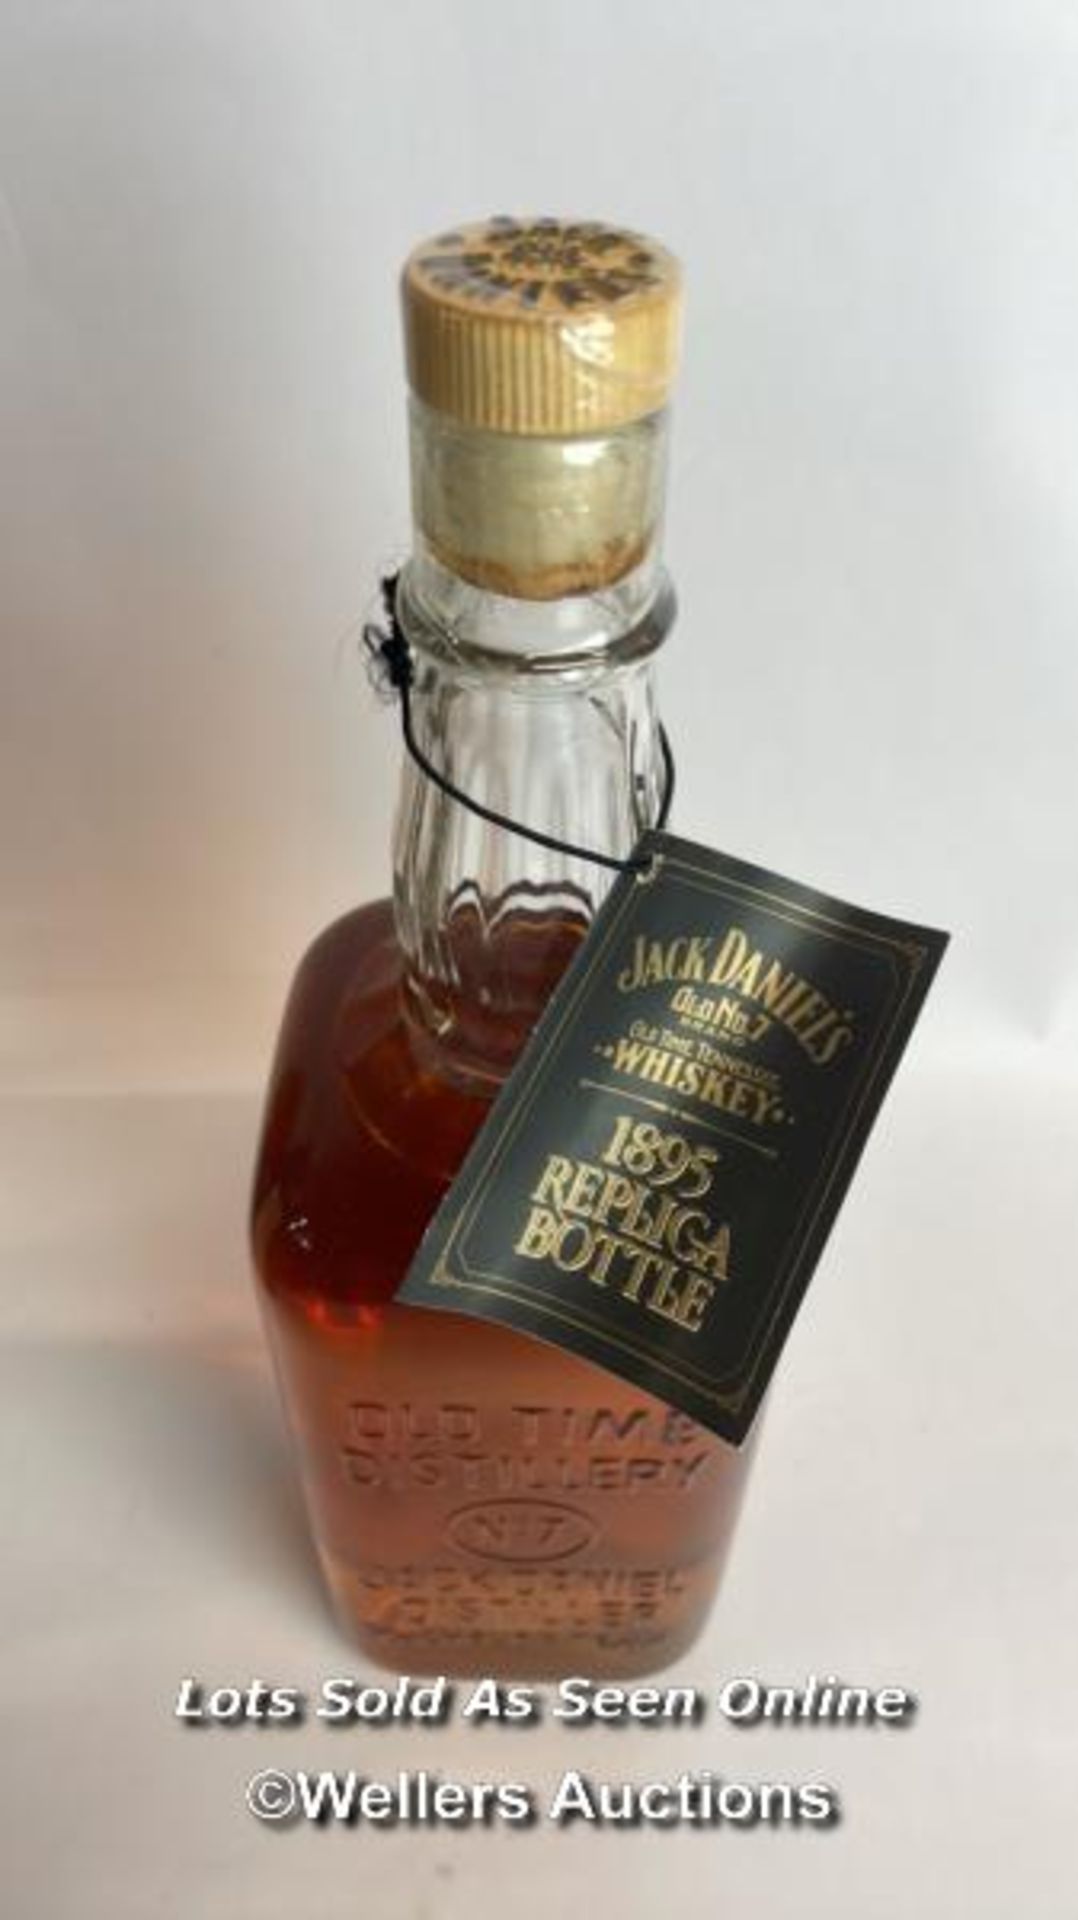 1895 Jack Daniels Replica Bottle, Old No.7 Brand, Old Time Tennessee Whiskey, 1L, 43% vol / Please - Bild 6 aus 7